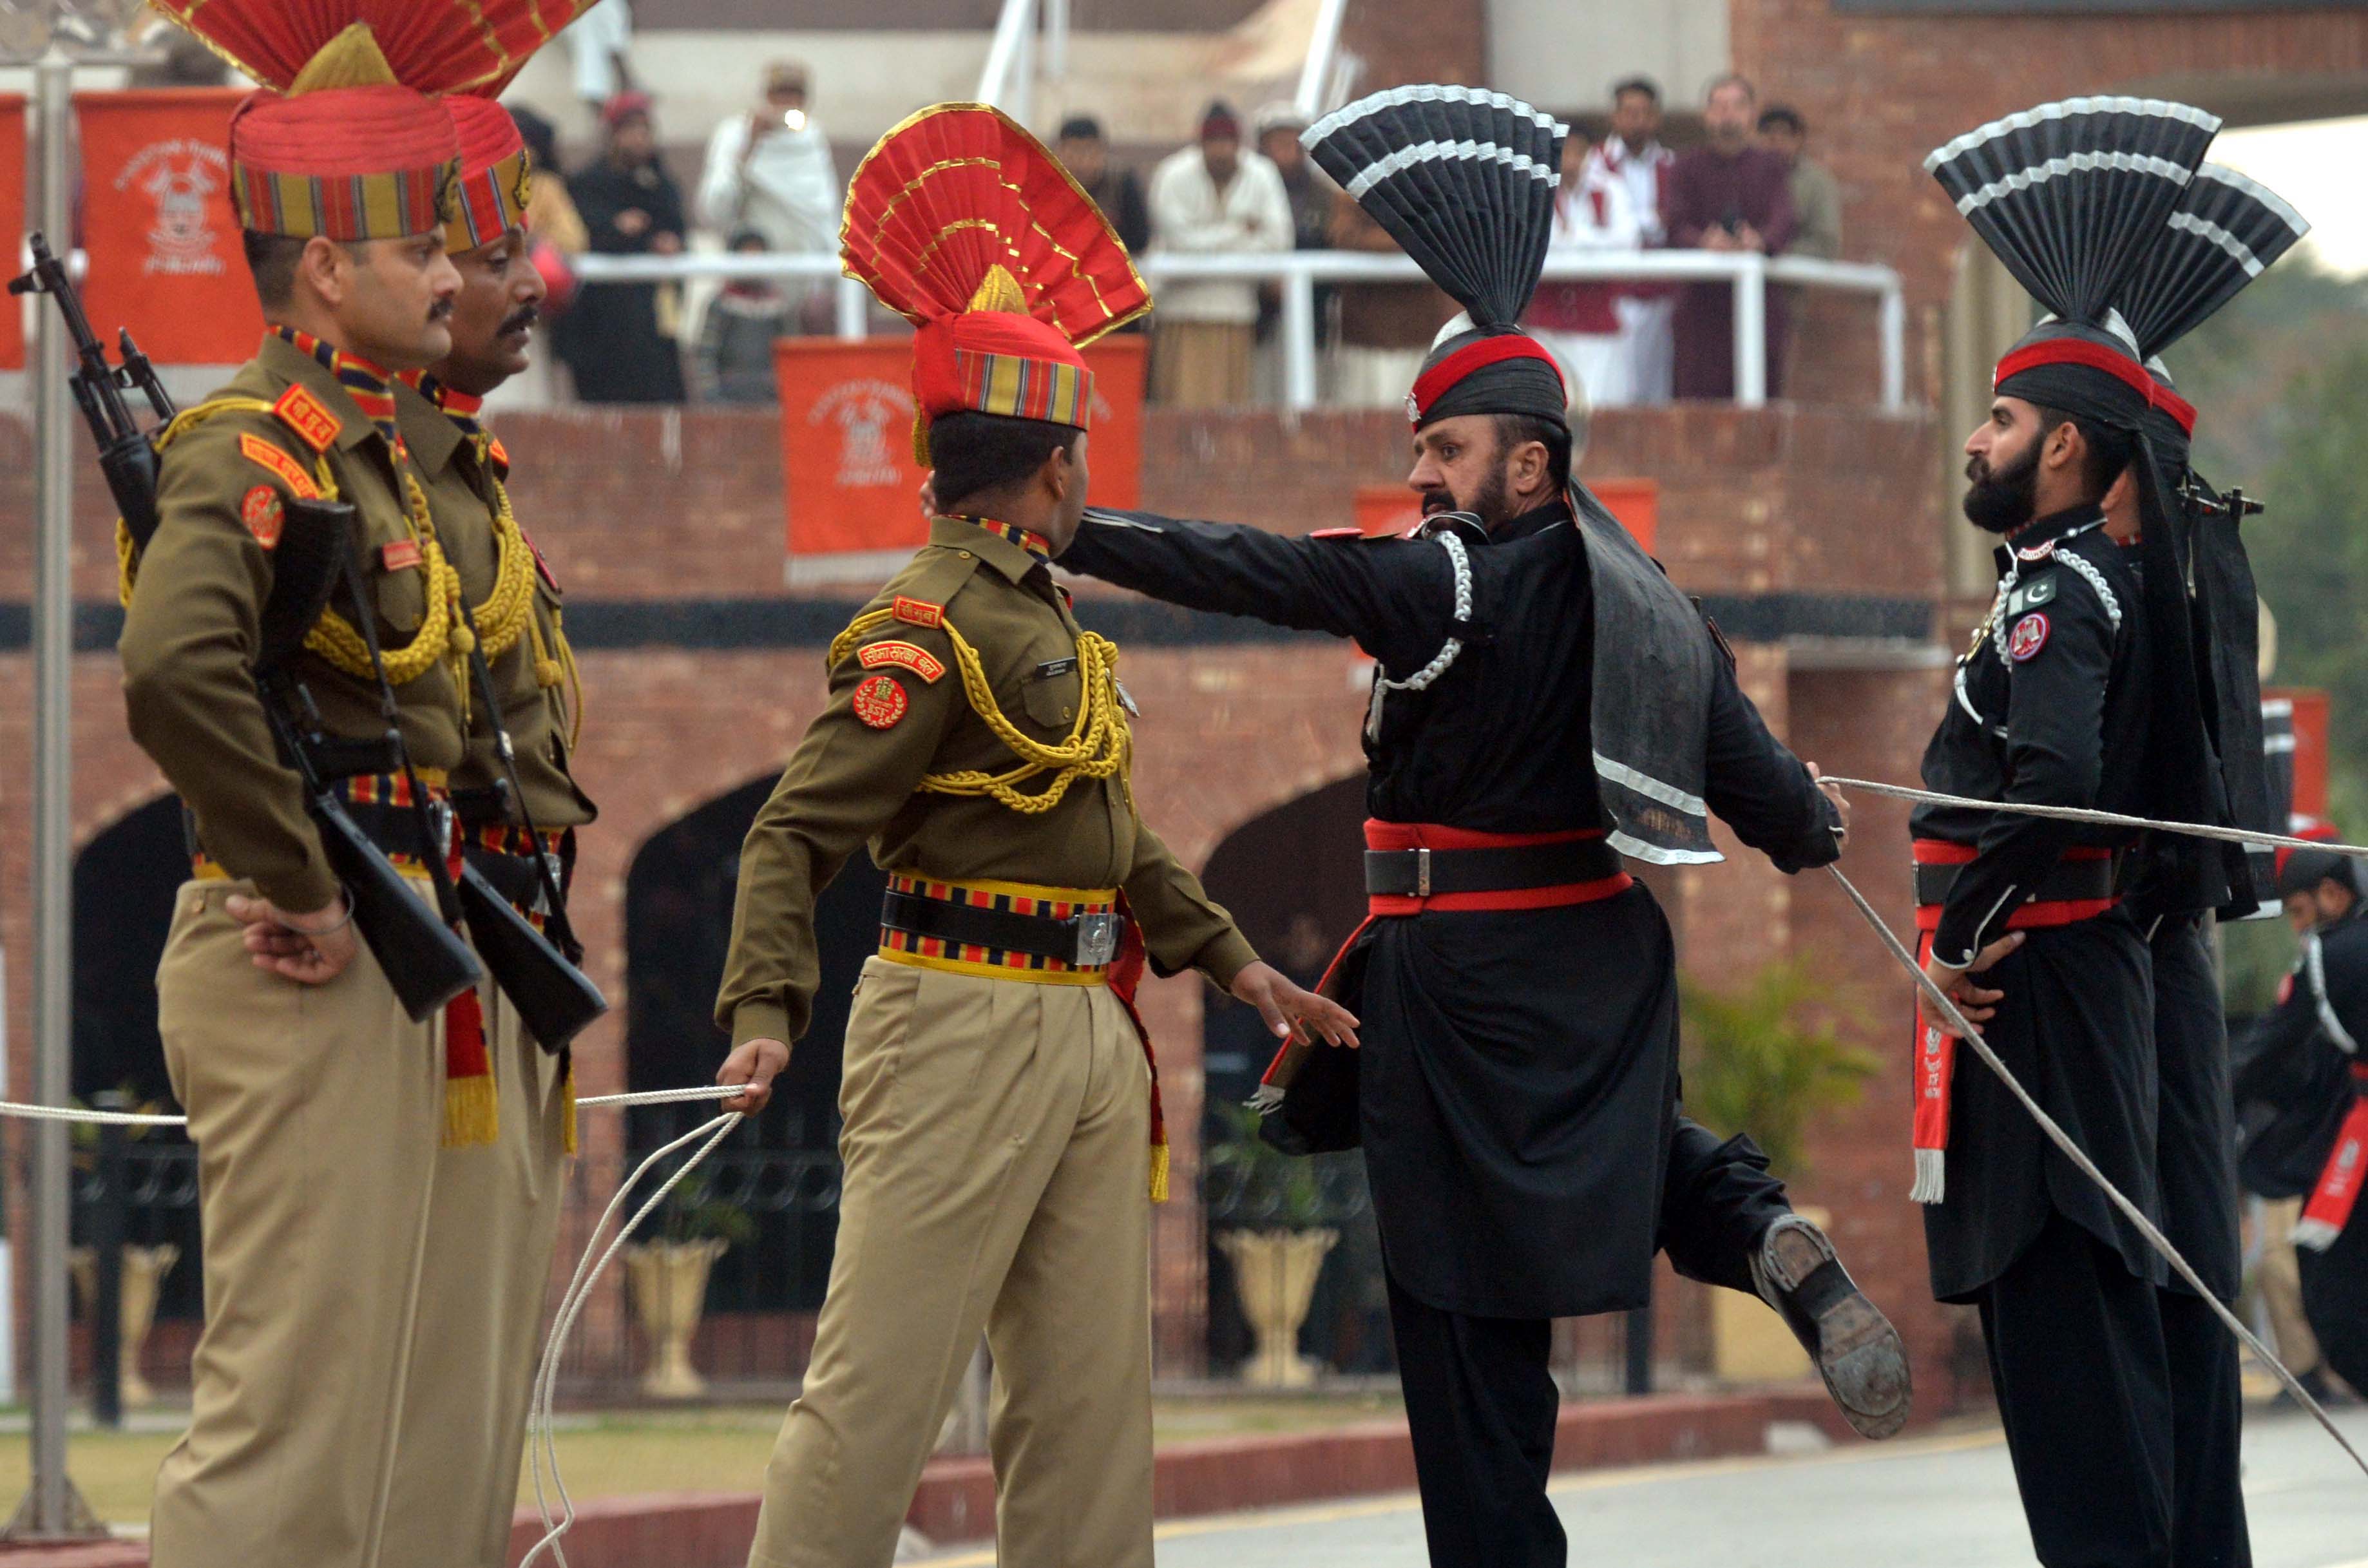 Indian Border Security Force personnel wearing brown uniforms and Pakistani Rangers wearing black uniforms take part in the Beating Retreat ceremony at the India-Pakistan Wagah border post on January 22, 2019.